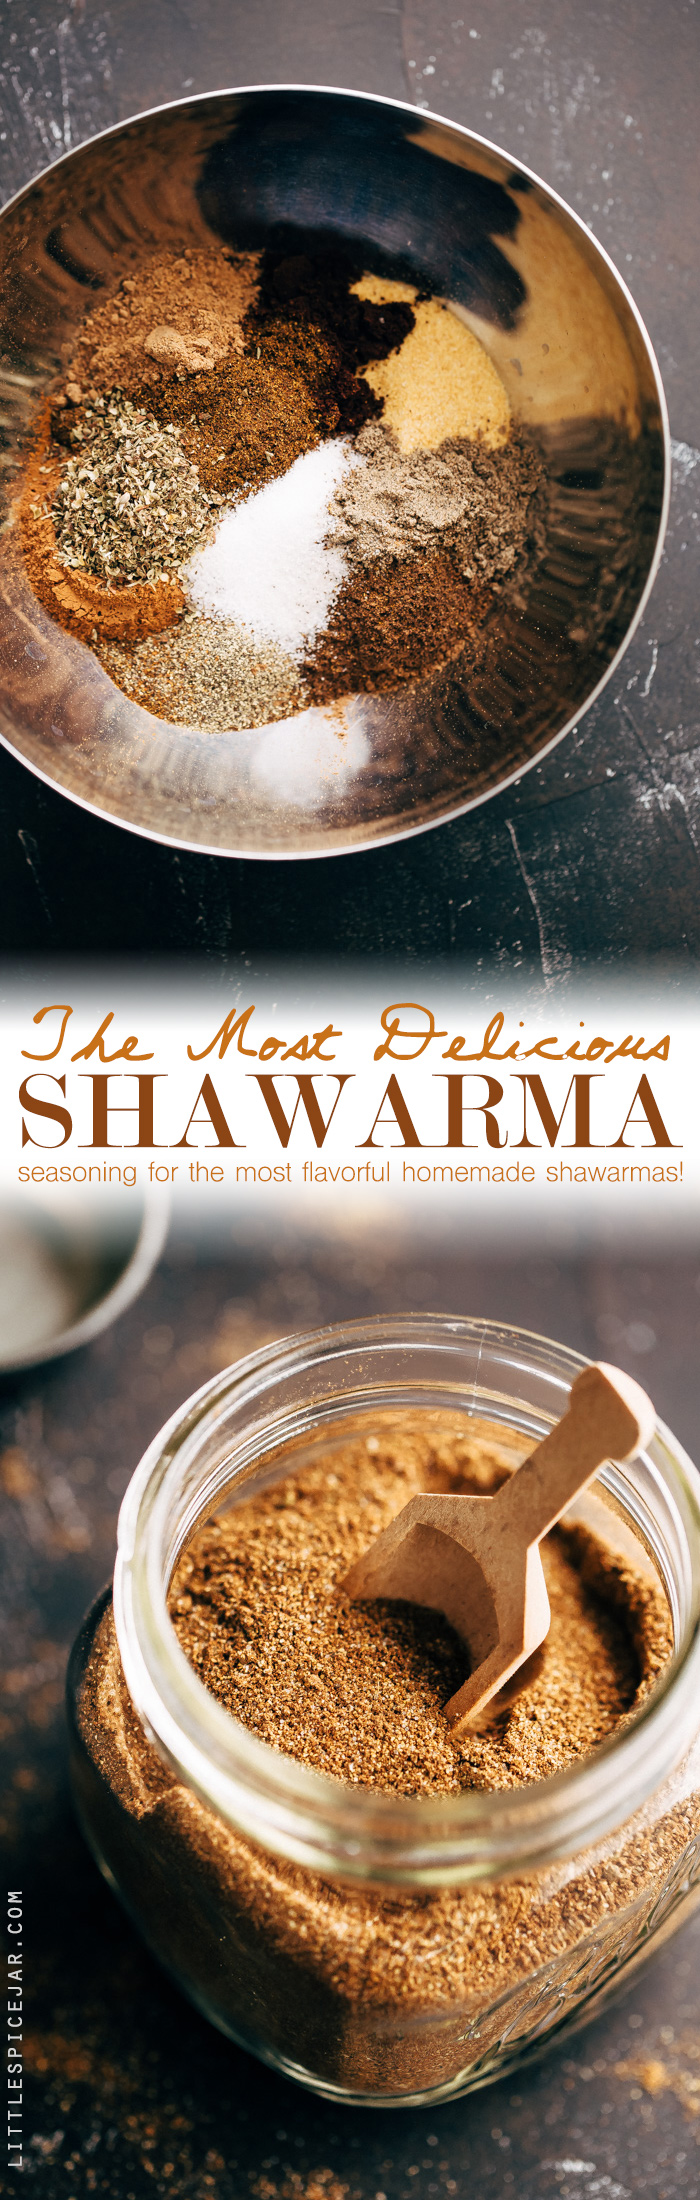 Most Delicious Homemade Shawarma Seasoning - an all purpose shawarma seasoning for chicken, beef, or roasted chickpeas! Make a big batch of this stuff and use it for things like shawarma bowls or wraps! #shawarma #shawarmaseasoning #chickenshawarma #beefshawarma | Littlespicejar.com